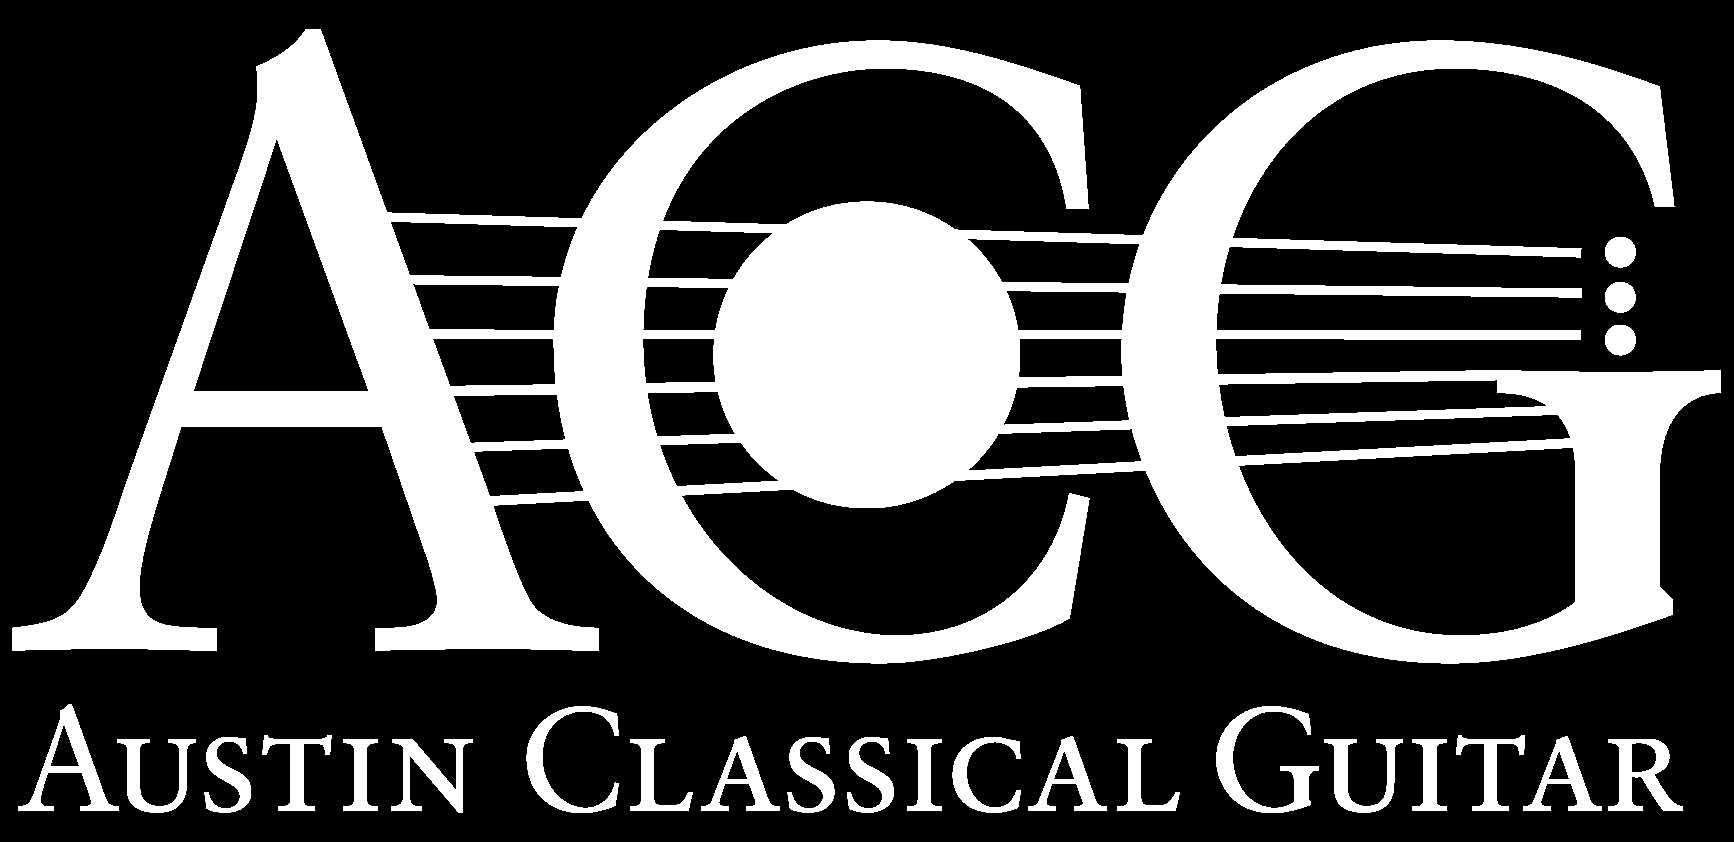 Austin Classical Guitar Logo: ACG in white on a black background with lines and dots creating the look of a guitar across the letters and "Austin Classical Guitar" in white underneath.